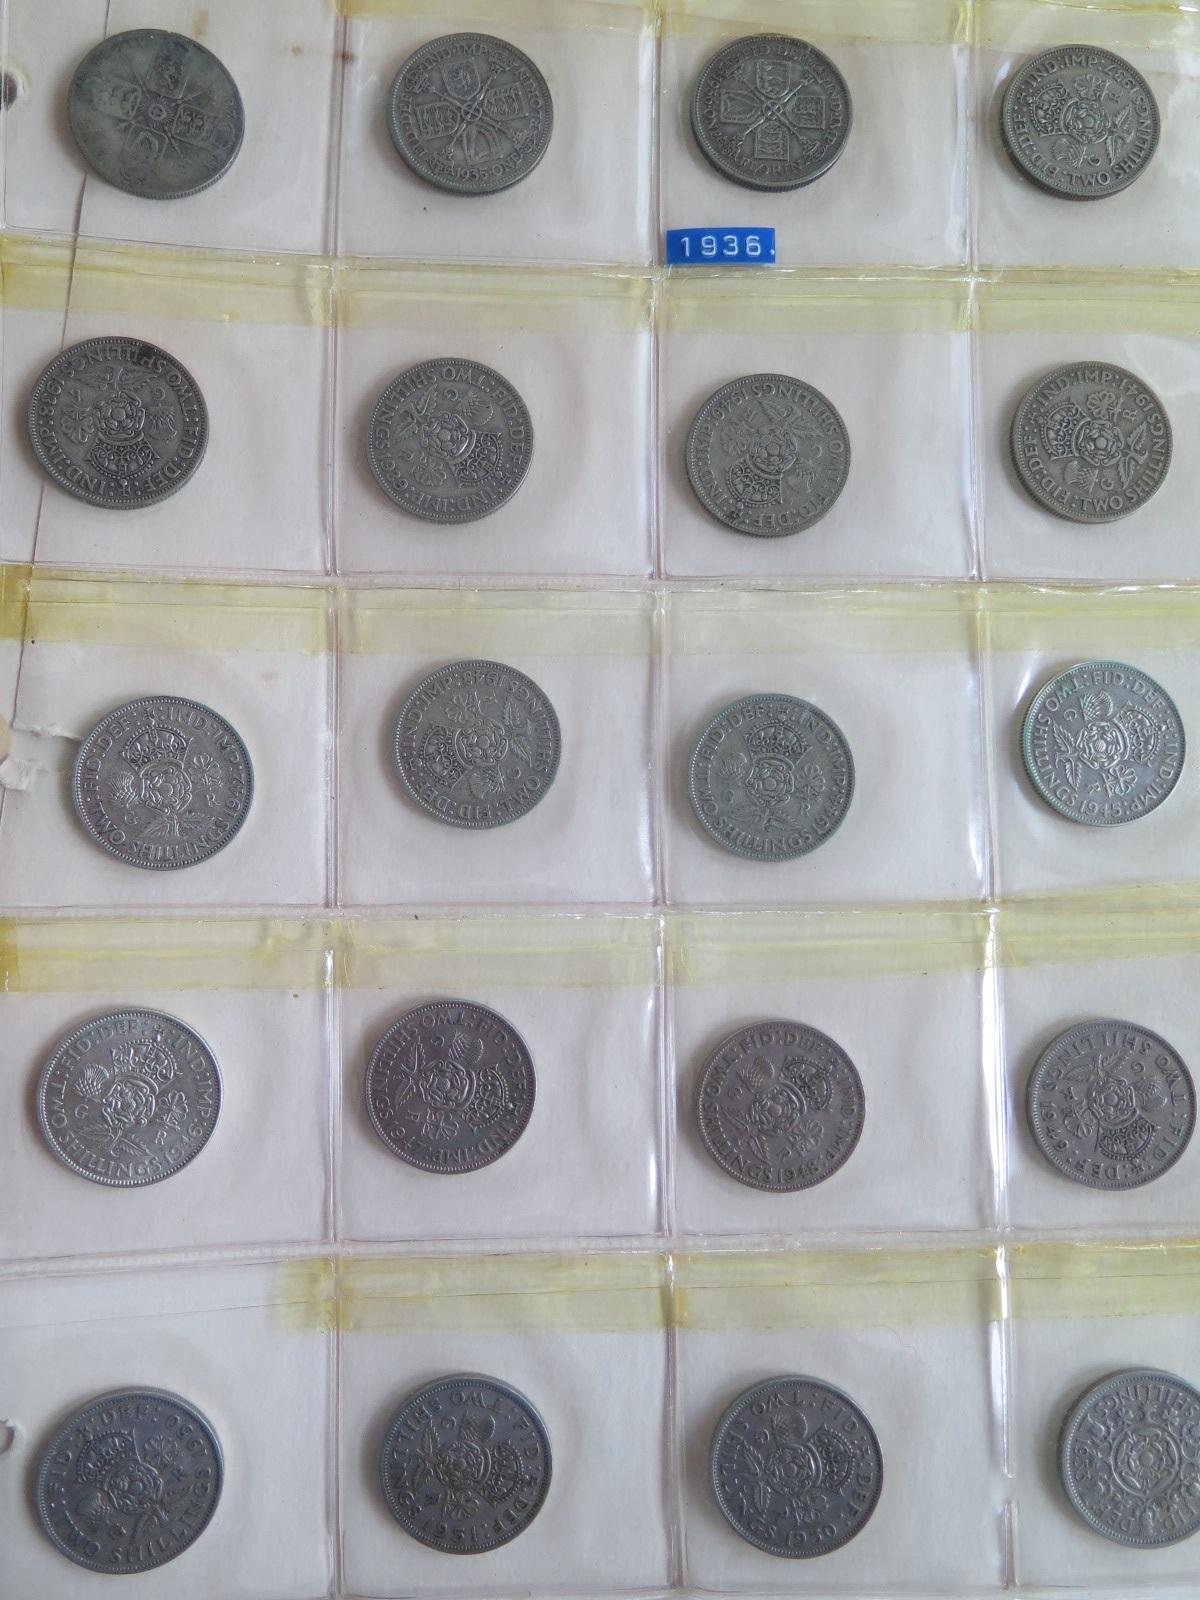 A collection of British coinage including some pre 1946, US coins and commemorative coins, with - Image 3 of 4